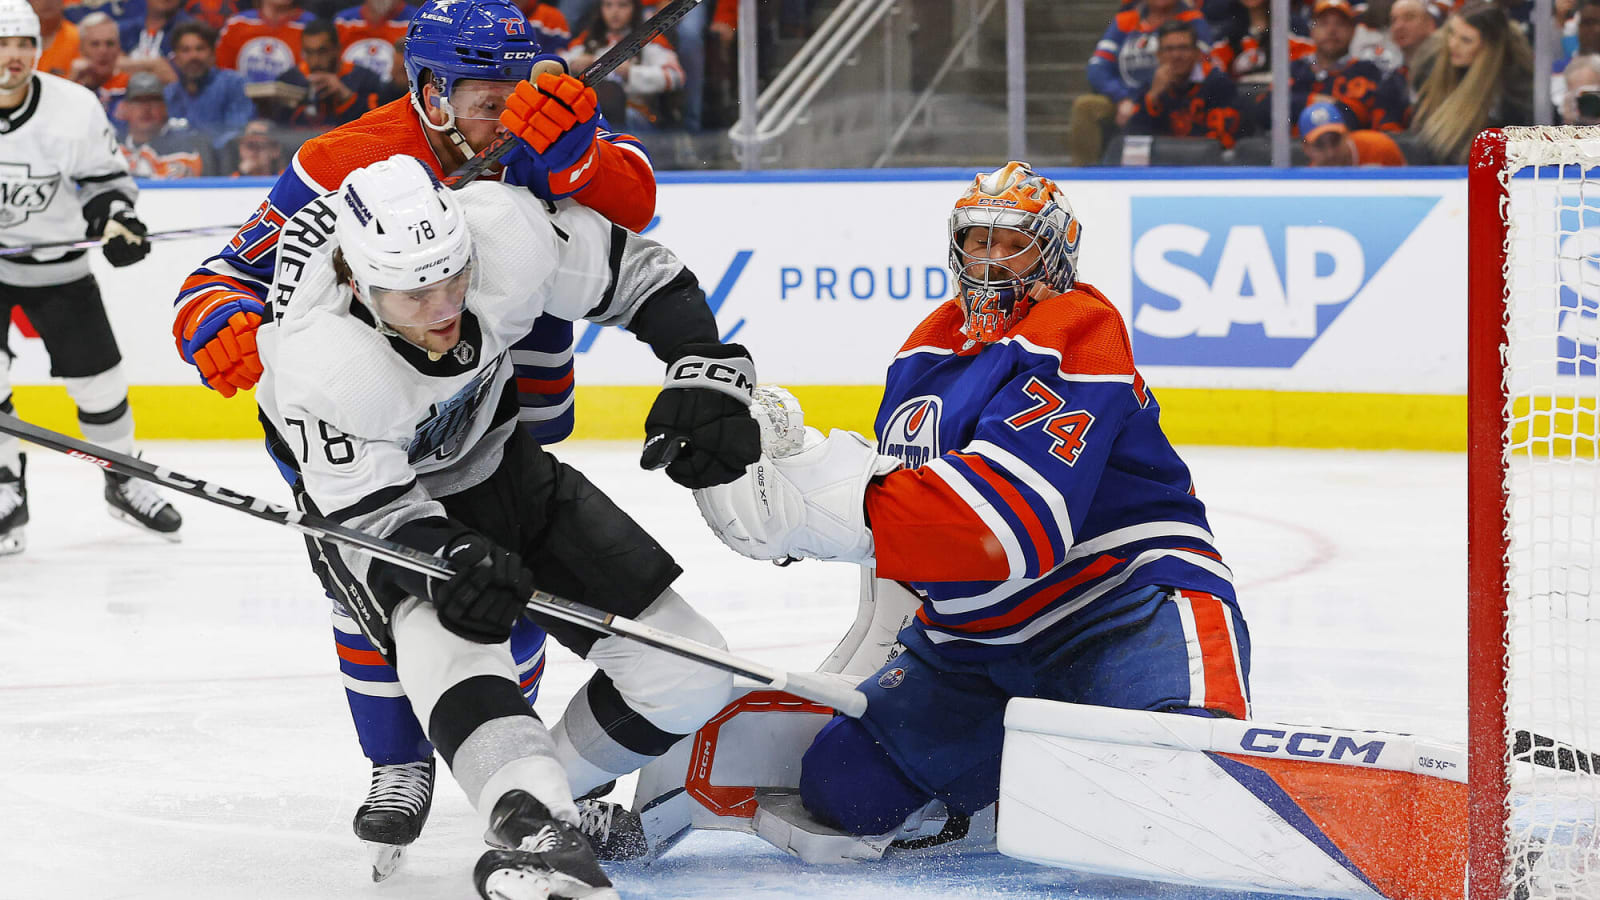 The Oilers’ first period and sloppy puck management sunk them, fall 5-4 to Kings in OT